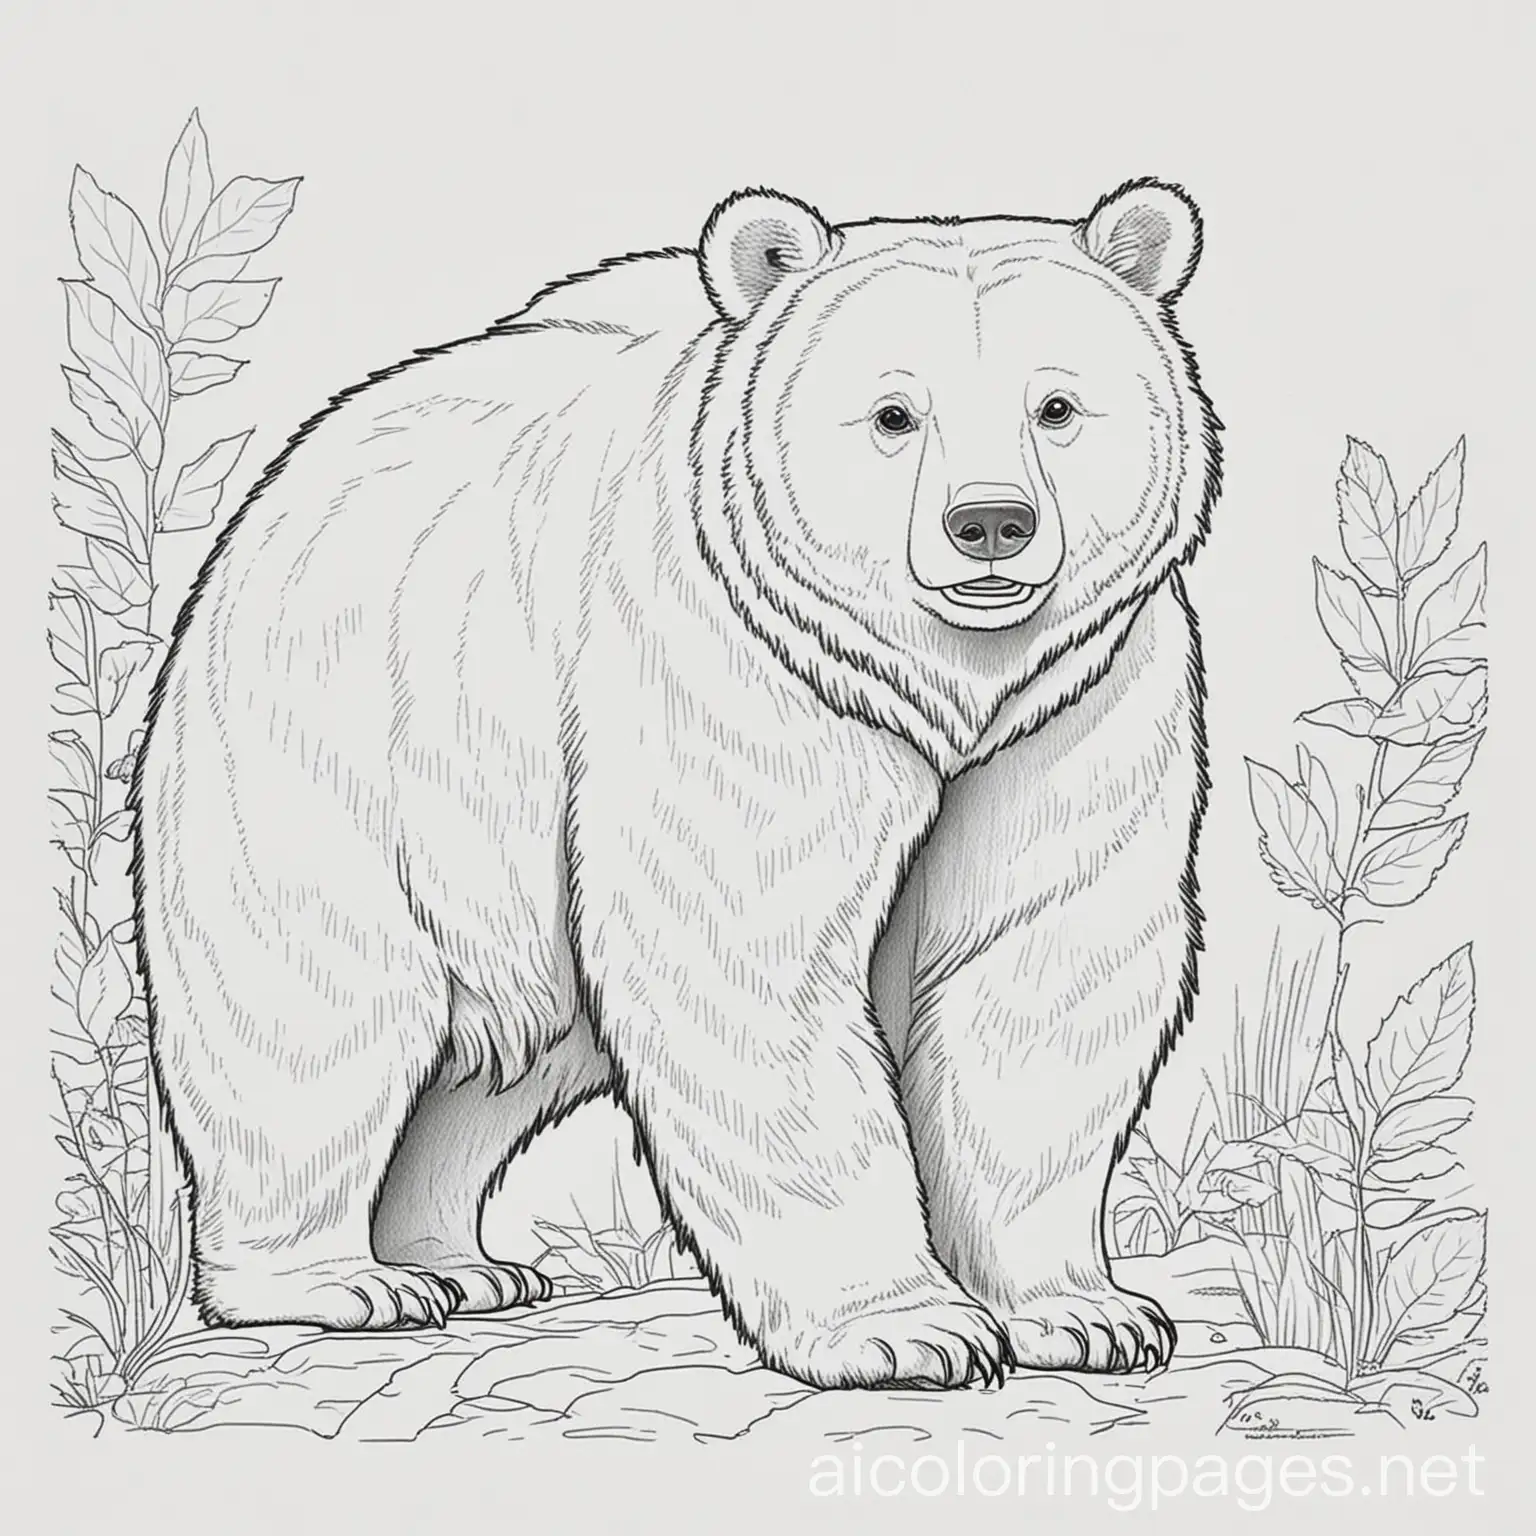 animals coloring book brown bear, Coloring Page, black and white, line art, white background, Simplicity, Ample White Space. The background of the coloring page is plain white to make it easy for young children to color within the lines. The outlines of all the subjects are easy to distinguish, making it simple for kids to color without too much difficulty